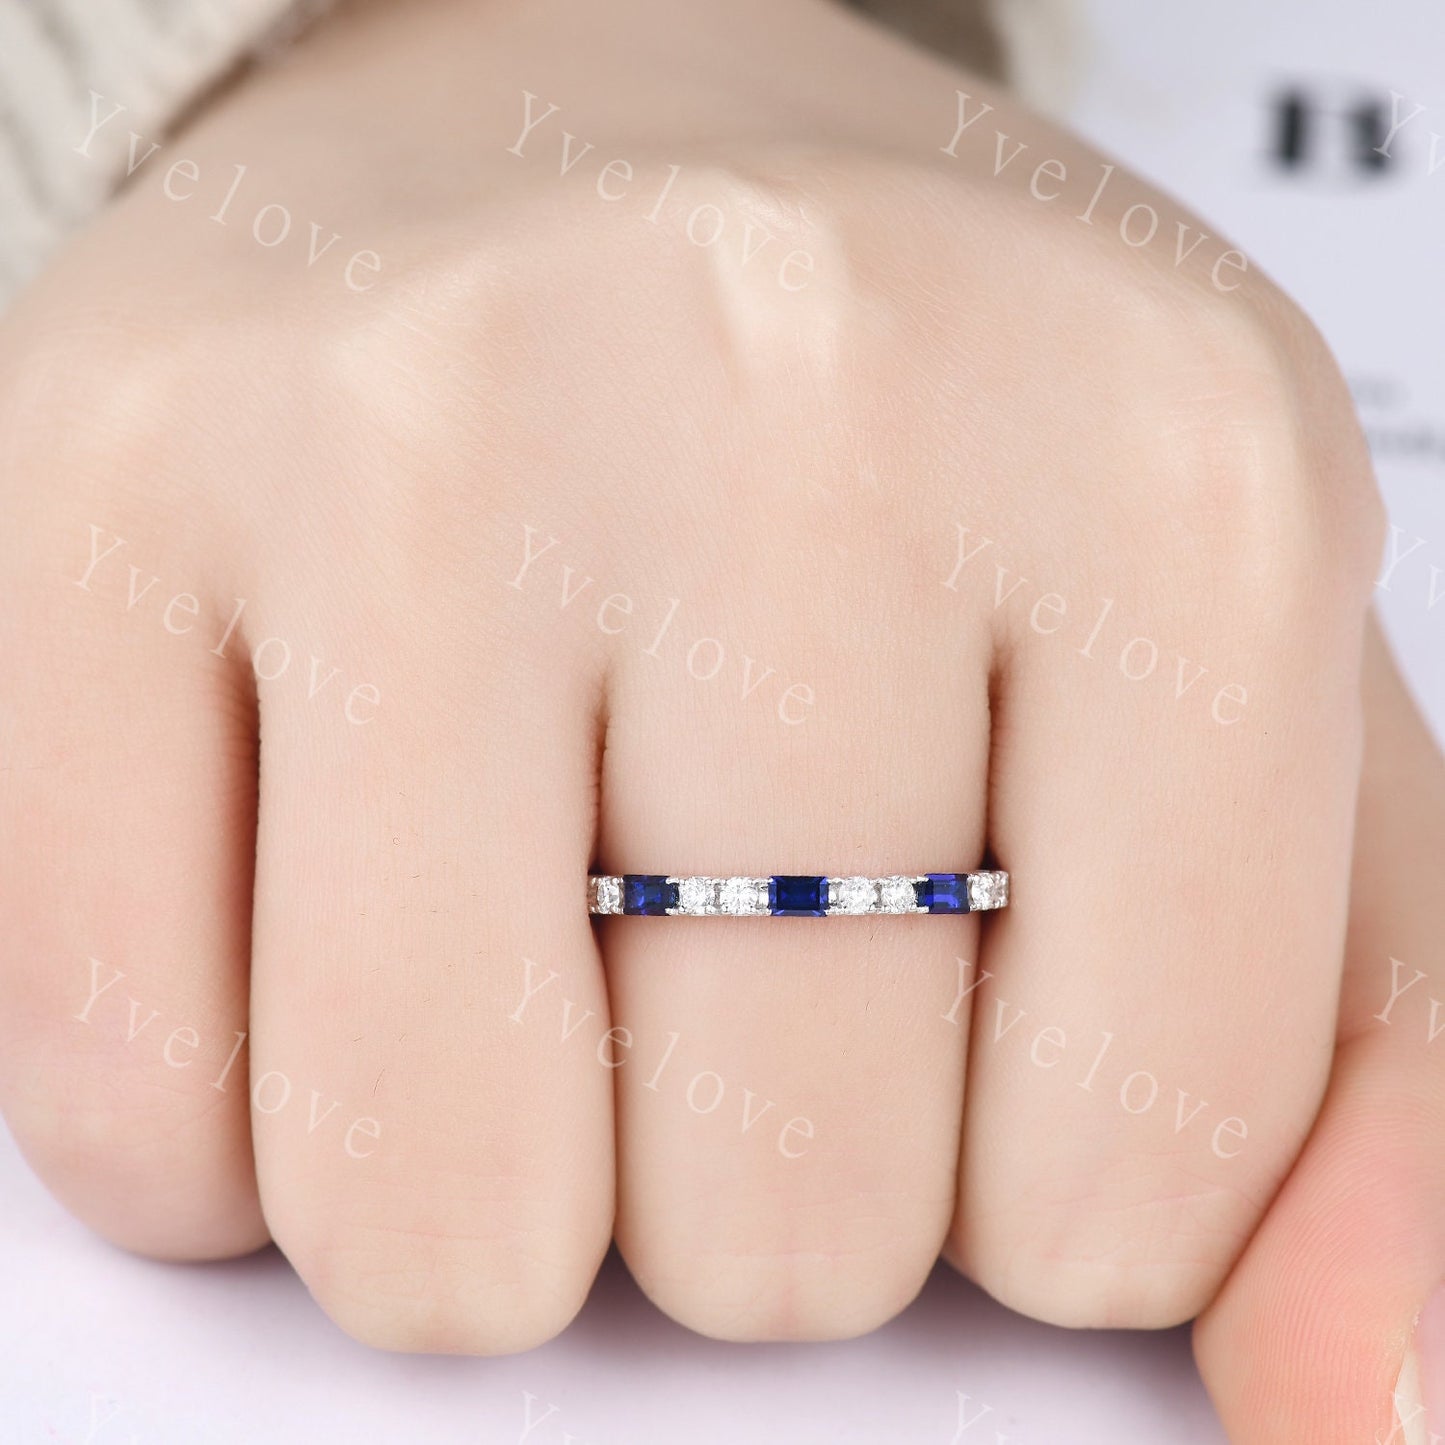 Baguette Cut Sapphire and Diamond Wedding Ring Half Eternity Band Stacking Matching Ring 14K White Gold Anniversary Gift For Her Customized